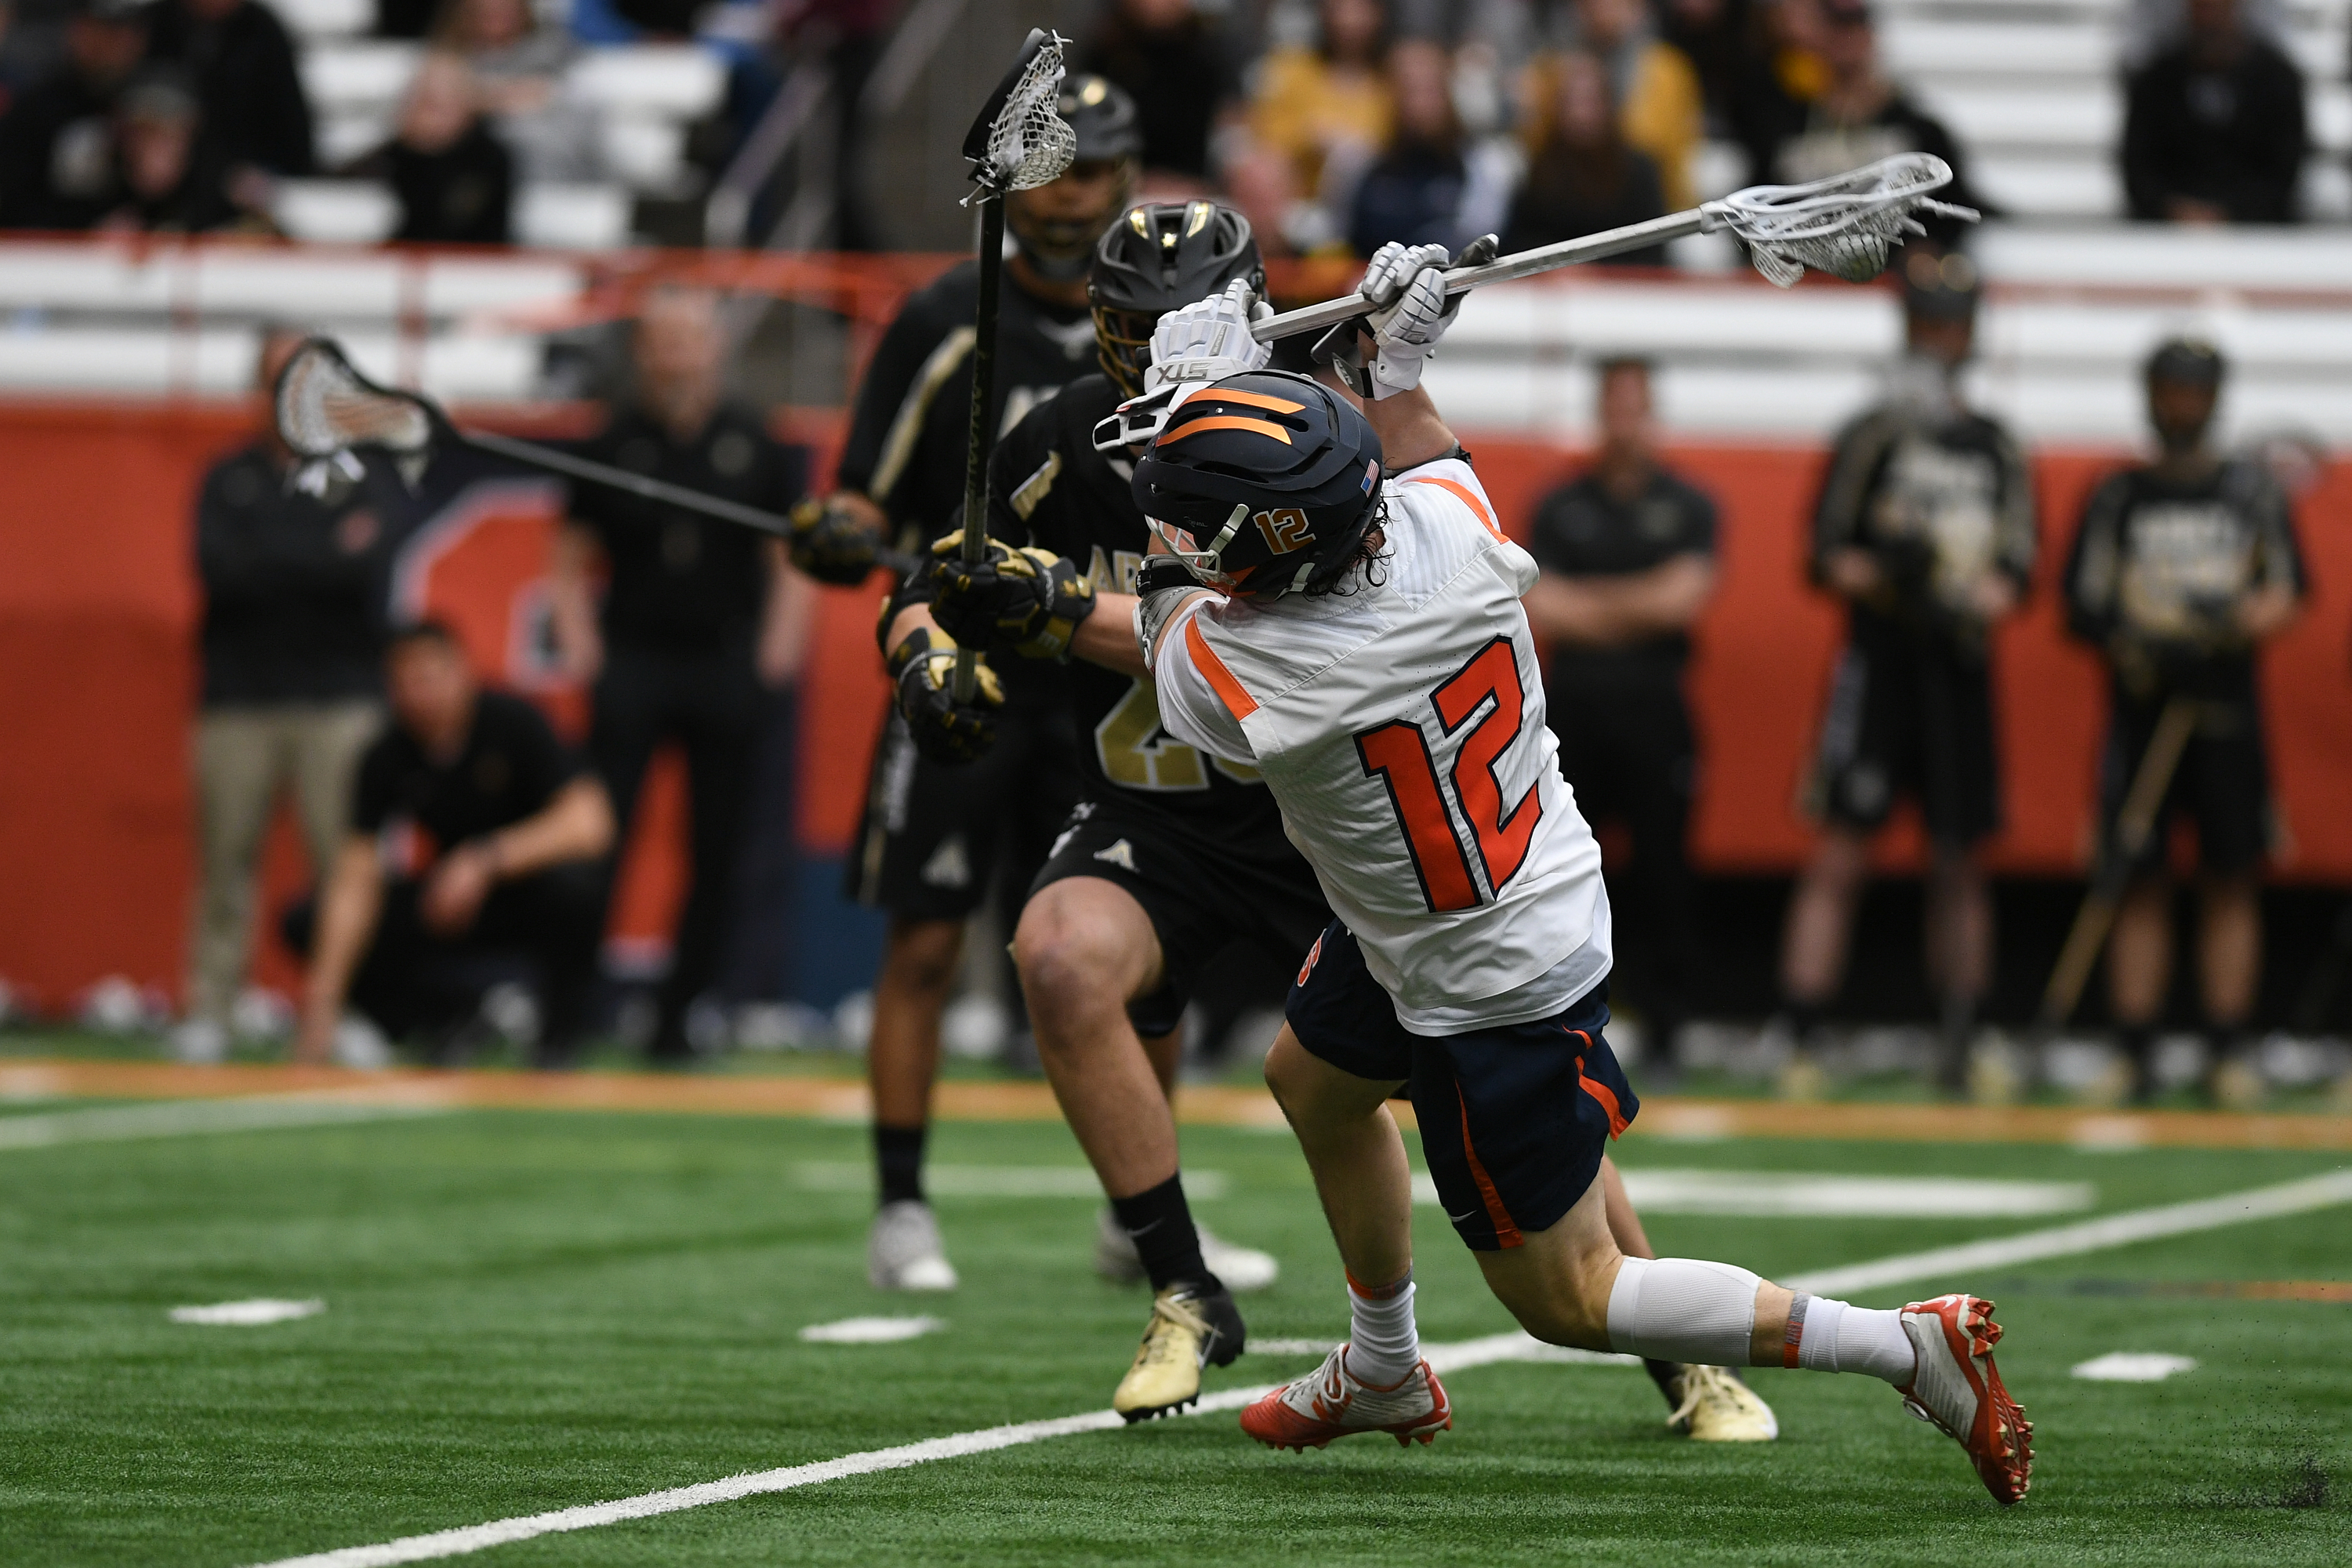 Jamie Trimboli winds up to shoot during the game at the Carrier Dome on Feb. 23, 2020. He led the game with 5 goals.